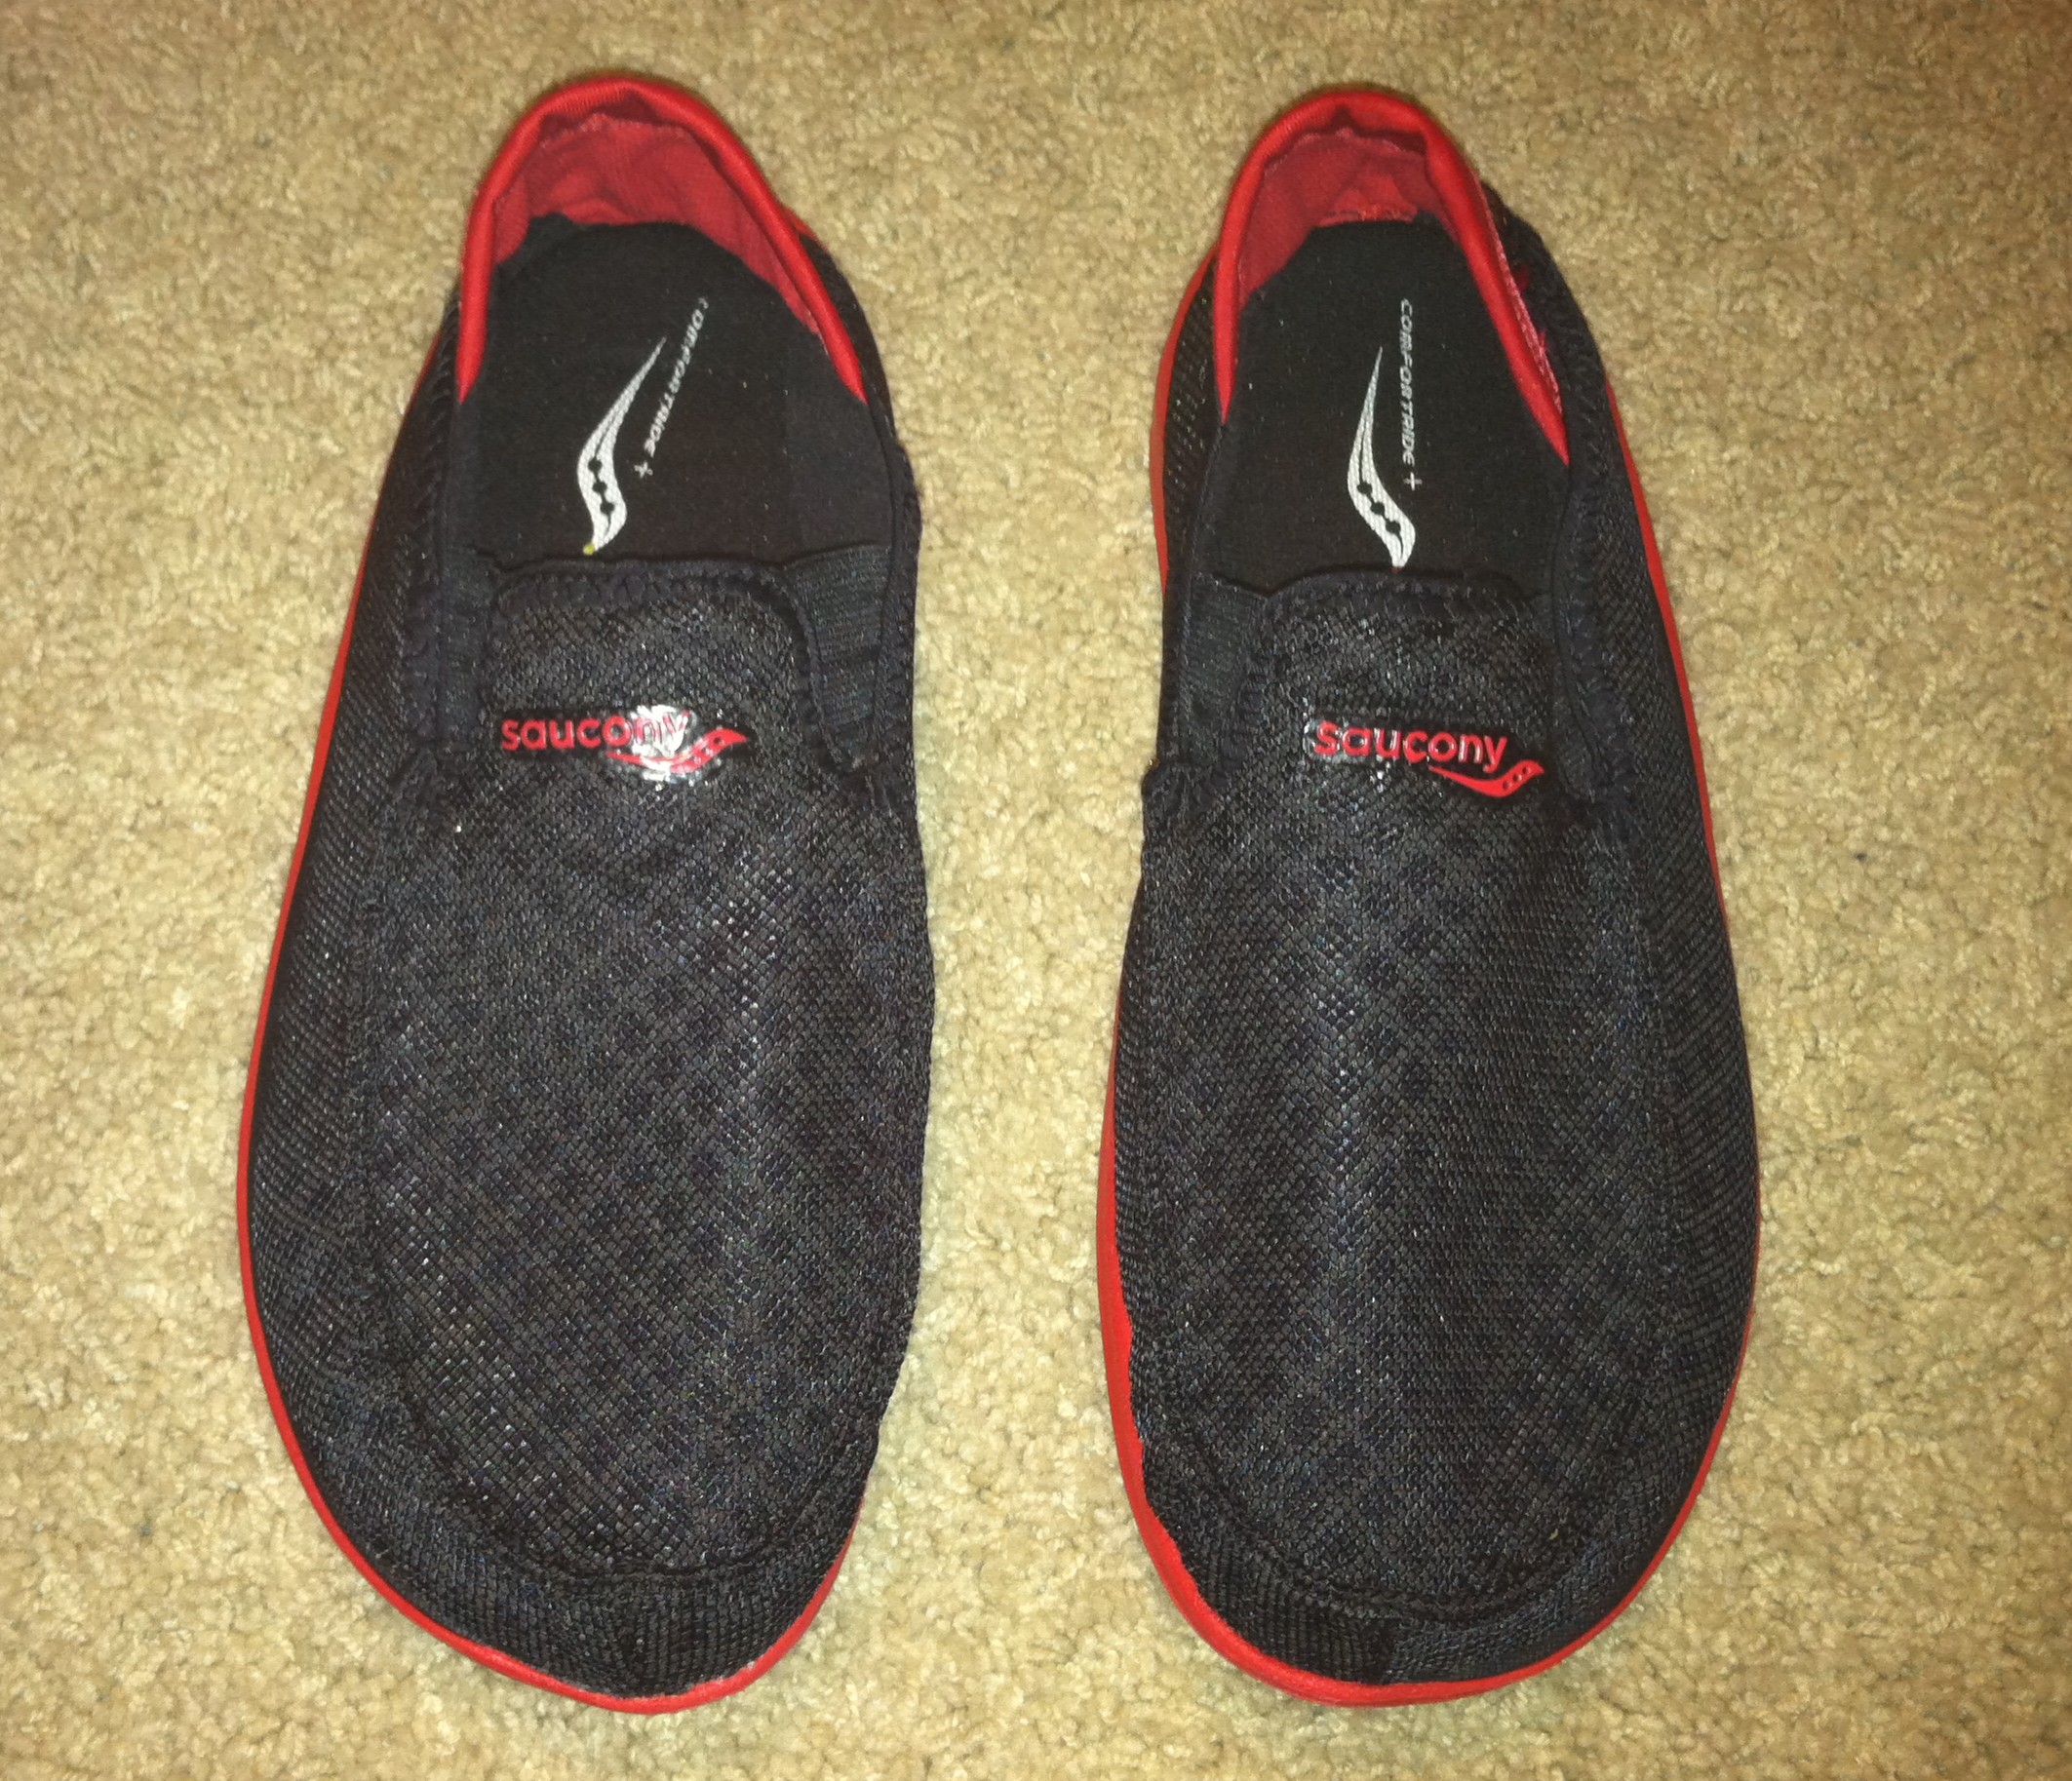 saucony recovery slippers